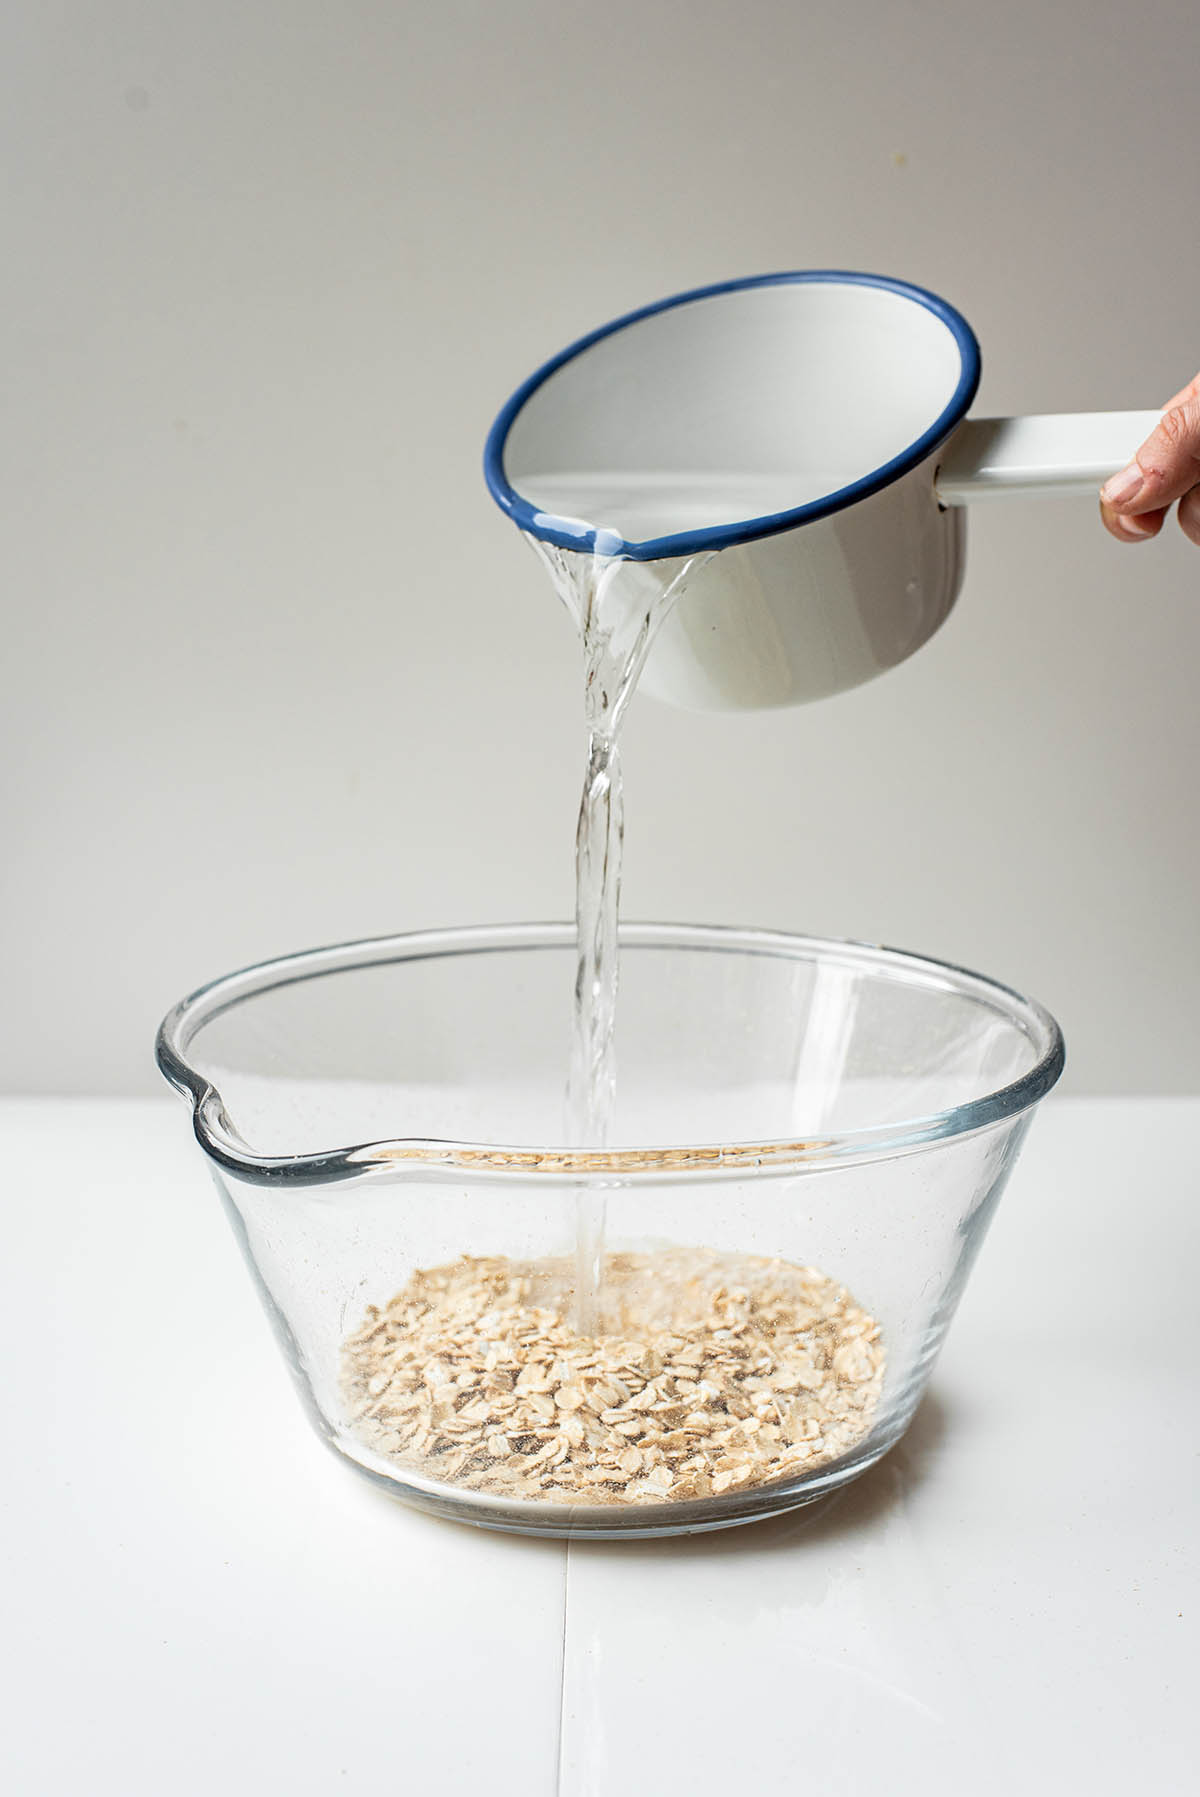 A small saucepan of hot water being poured into a large bowl with oats.